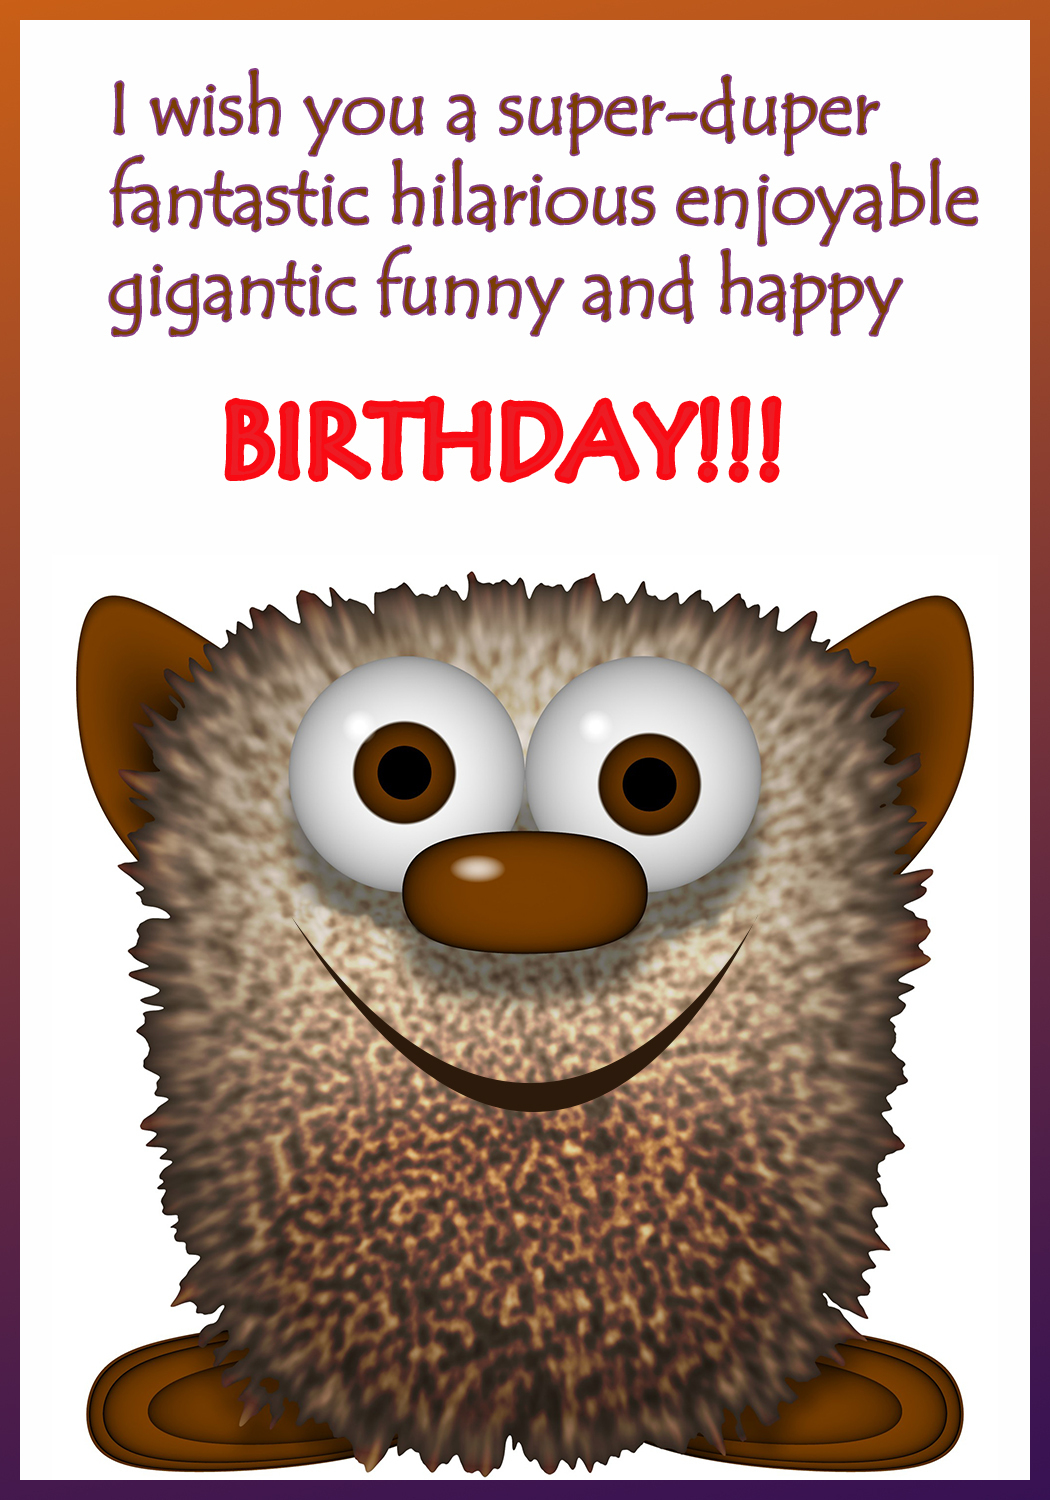 Funny Printable Birthday Cards - Free Printable Funny Birthday Cards For Dad